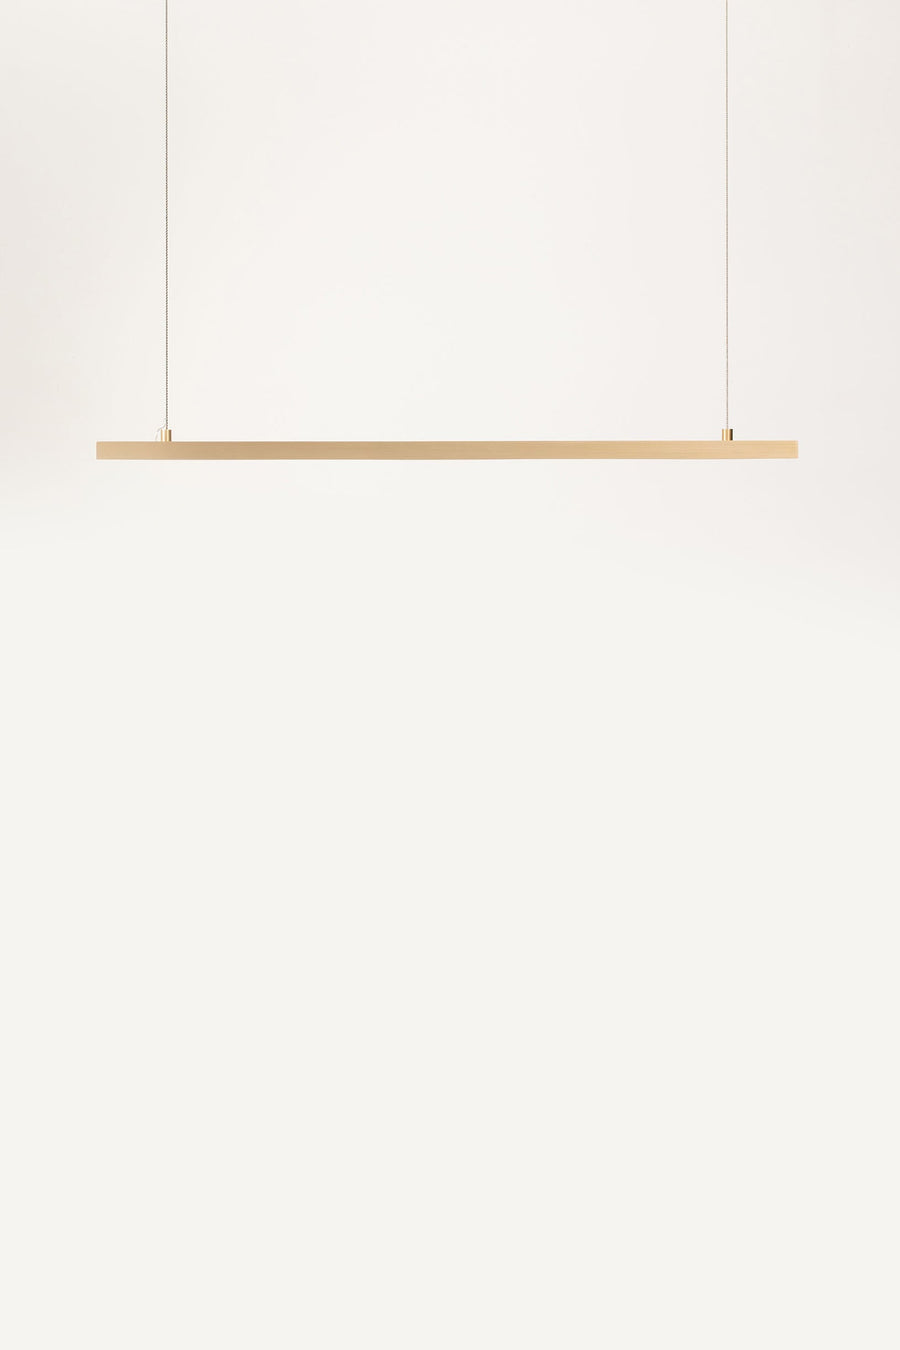 Lateral Light Sample - 2200 L - Brushed Brass